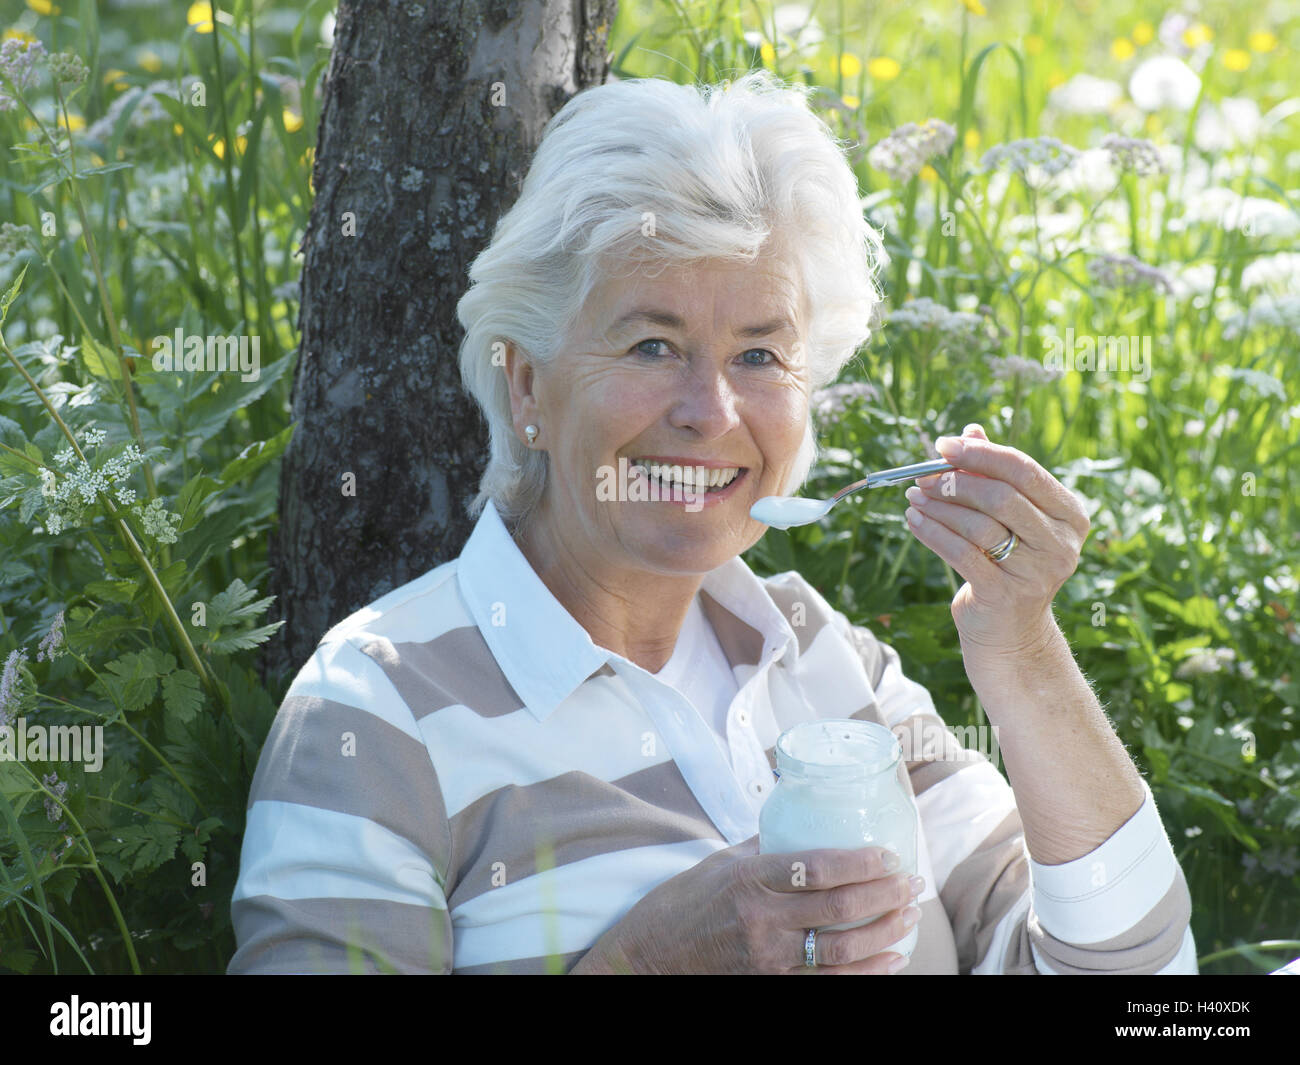 Garden, senior, happily, eat, yoghurt, portrait, meadow, summer, retirement, pension, leisure time, détente, rest, Best of all Age, old person, senior citizens, woman, happily, contently, fit, agile, young remaining, actively, food, food, natural product, lacteal product, natural yoghurt, yoghurt glass, glass, spoon, symbolically, nutrition, healthy, natural, vitality, life energy, health, vitality, enthusiasm, tuning positively, attitude to life, joy of life, lighthearted, tree, lean, sit, enjoy, flower meadow, nature, outside, summery, Stock Photo